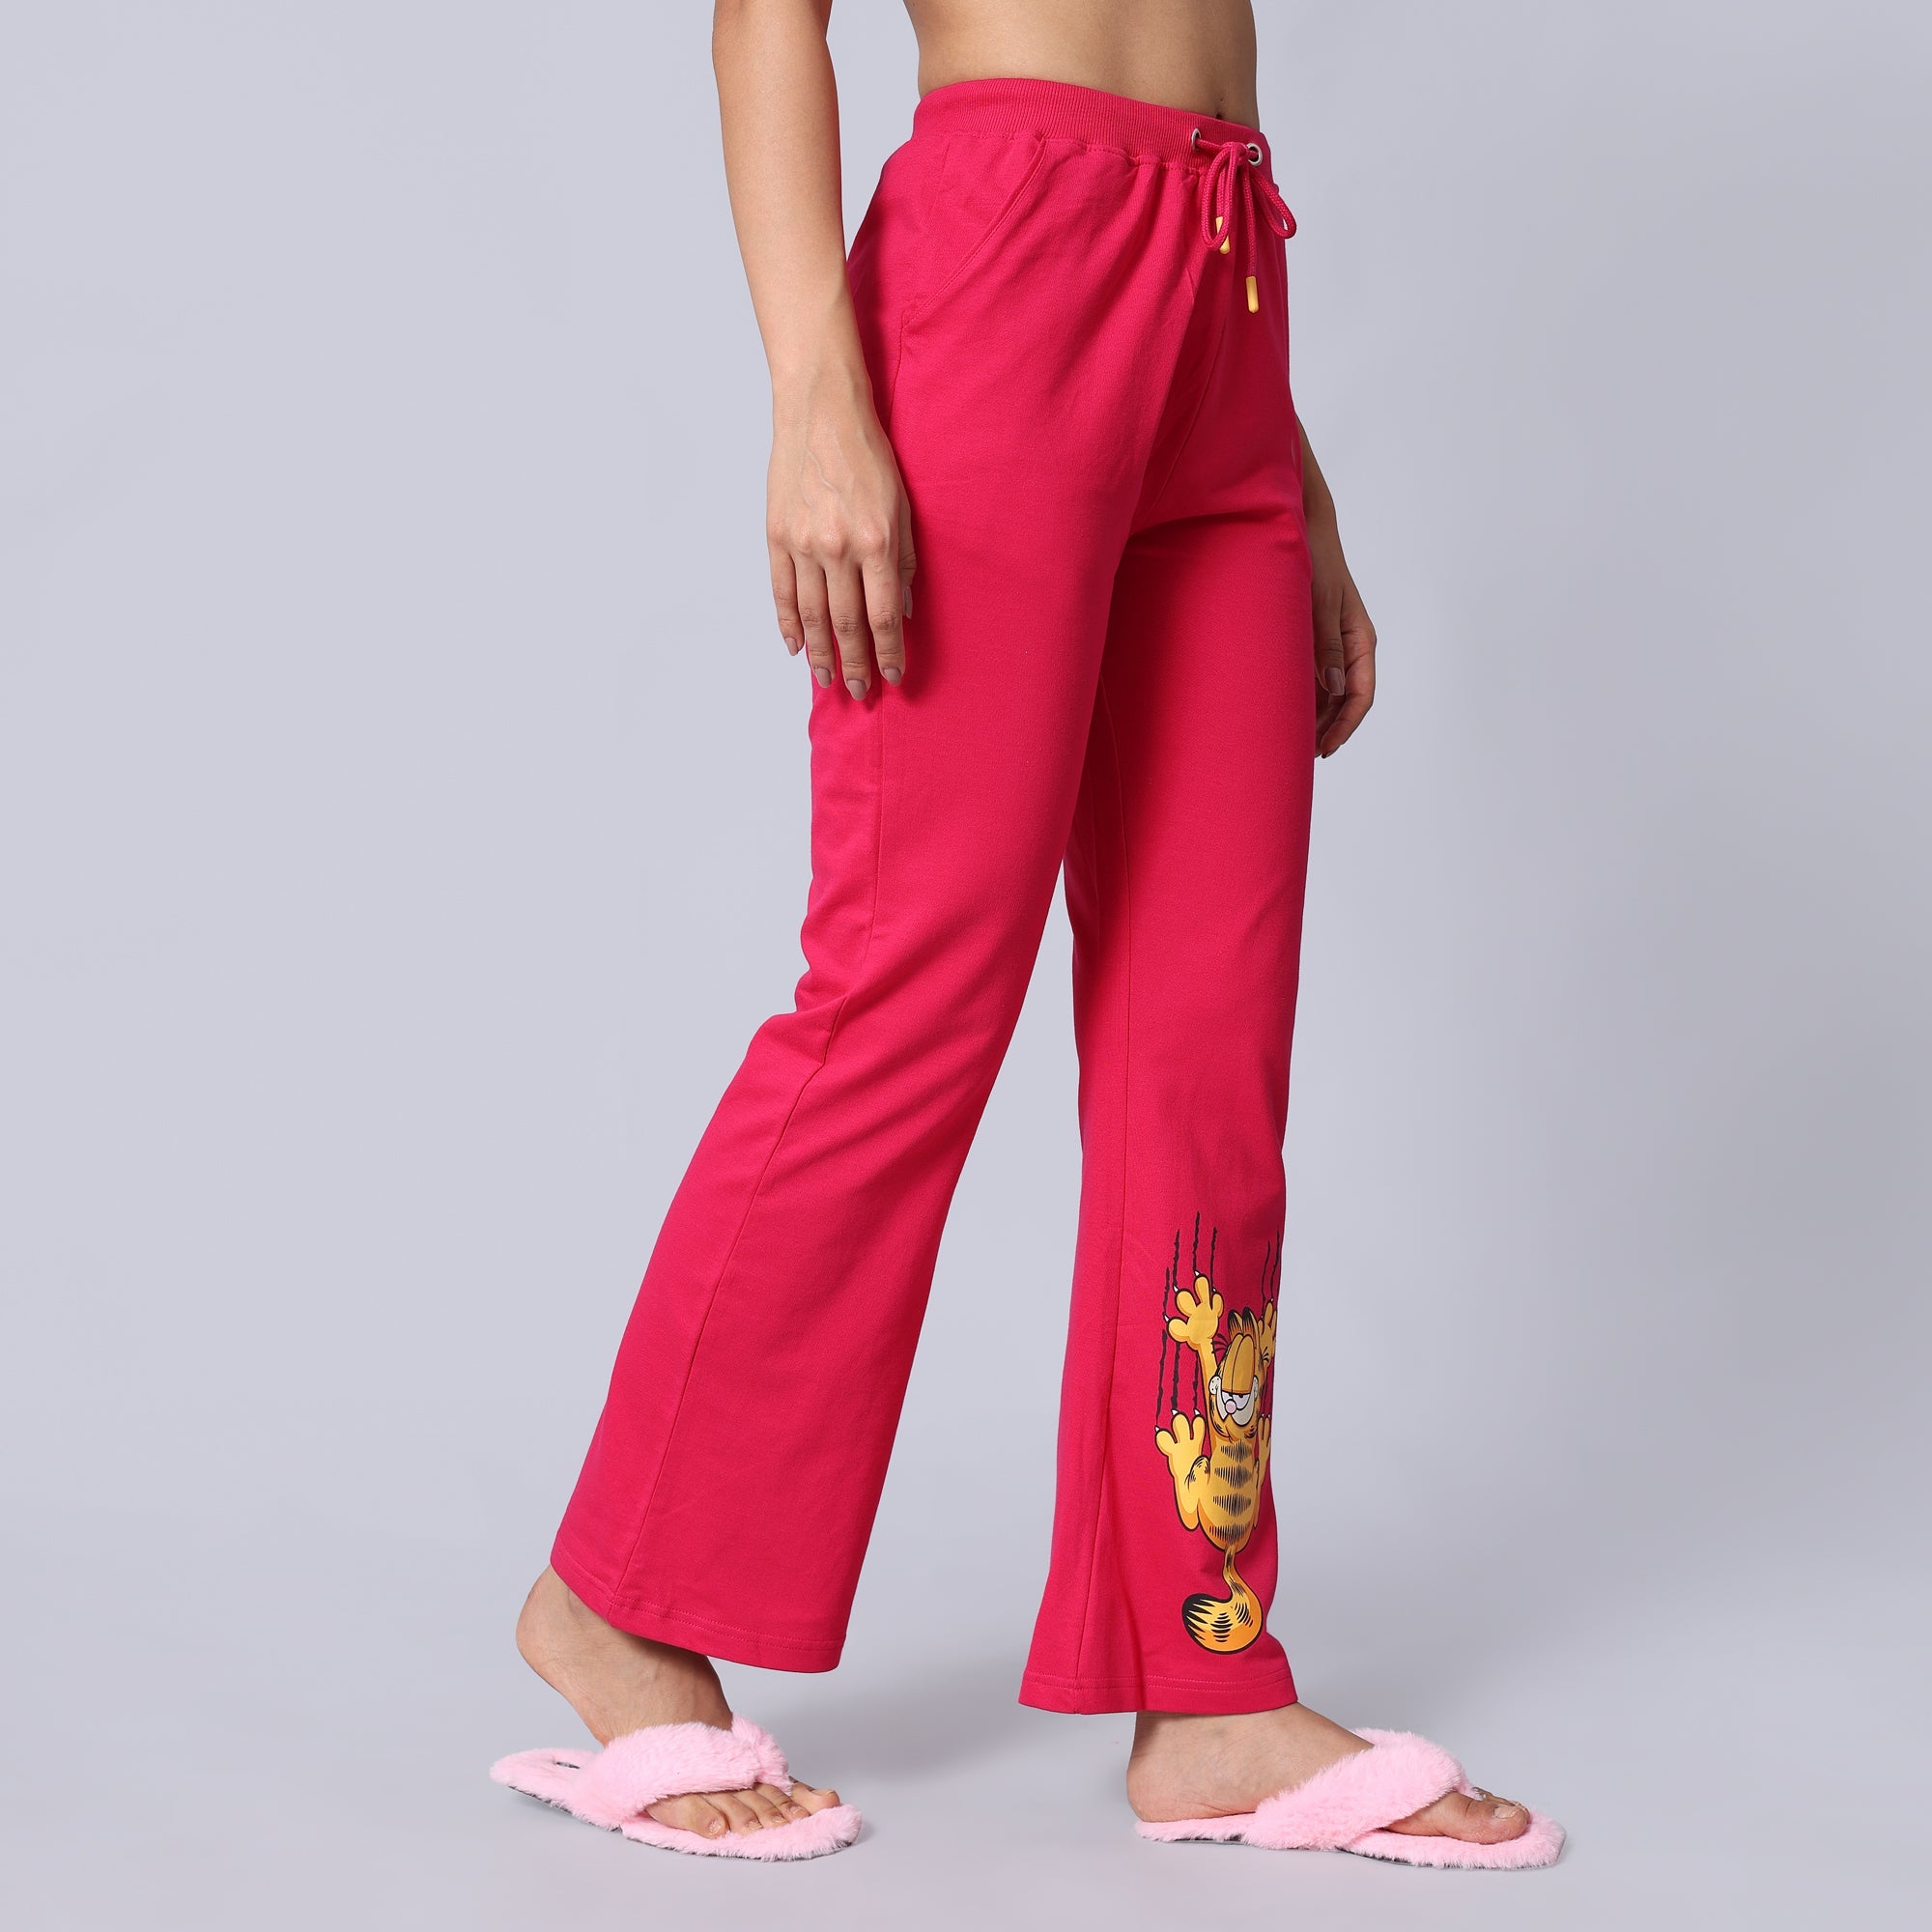 Evolove Women''s Micro Modal Solid Pyjama Relaxed Lounge Pants with Pockets  Super Soft Comfortable at Rs 399/piece, Readymade Garments in Mumbai